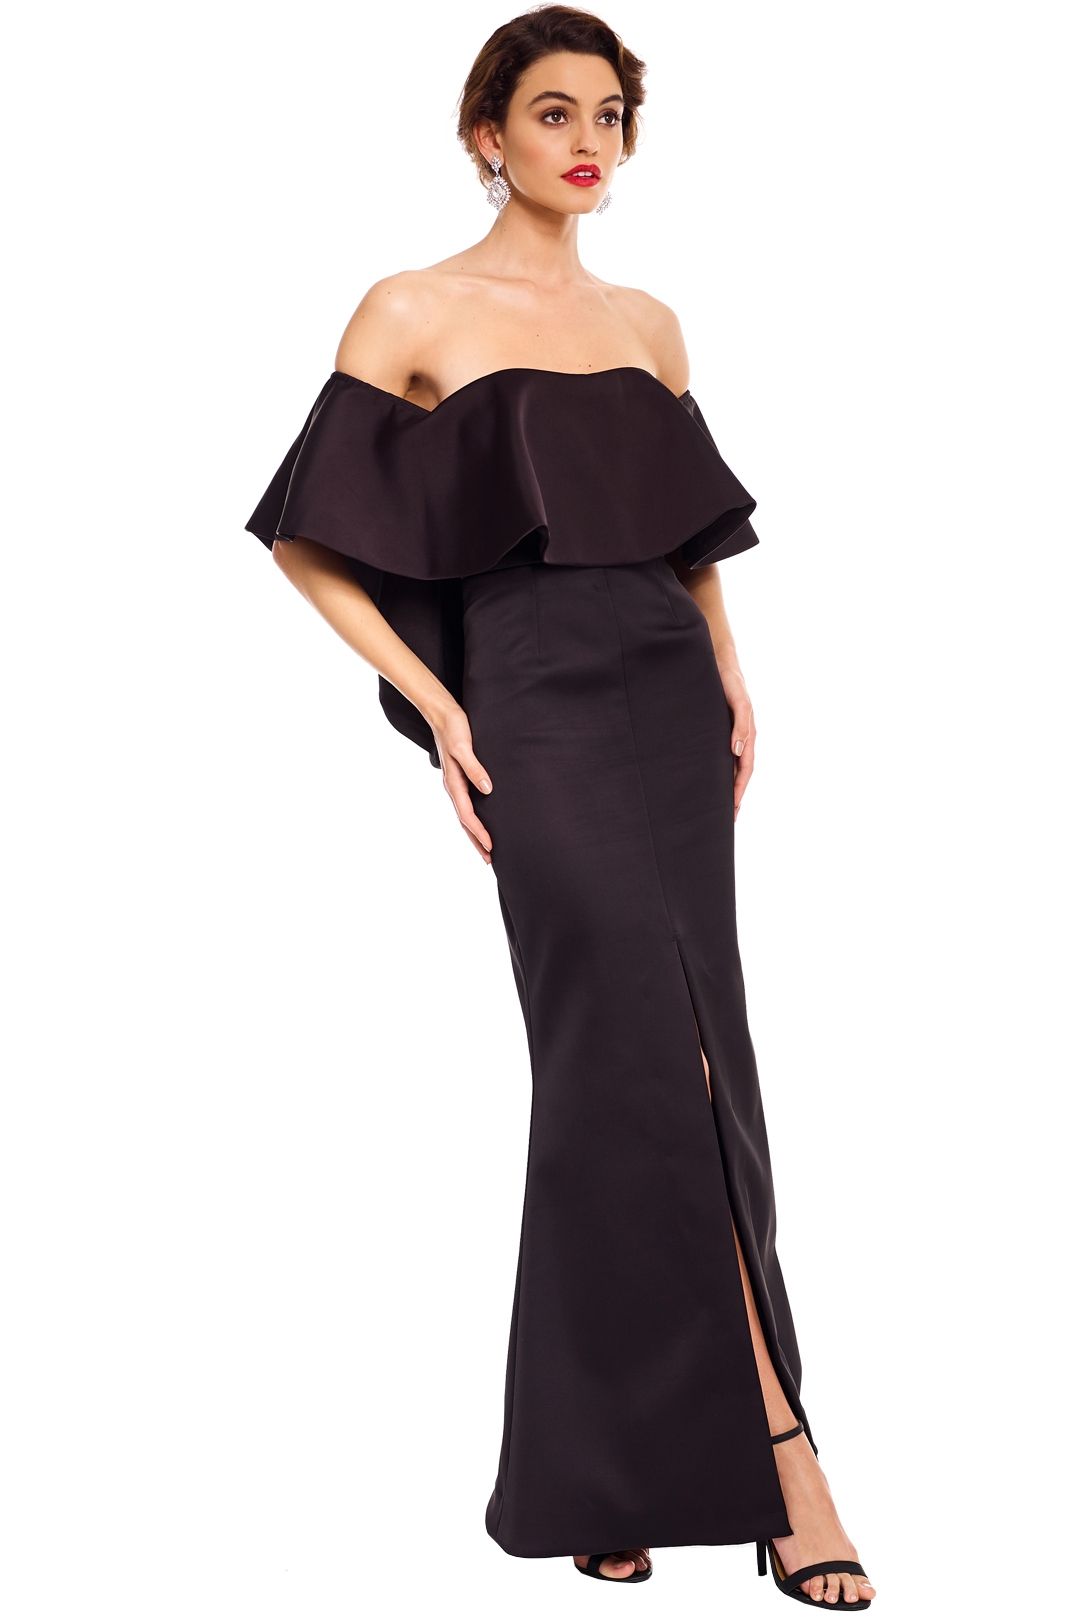 Talulah - Without You Gown - Black - Side